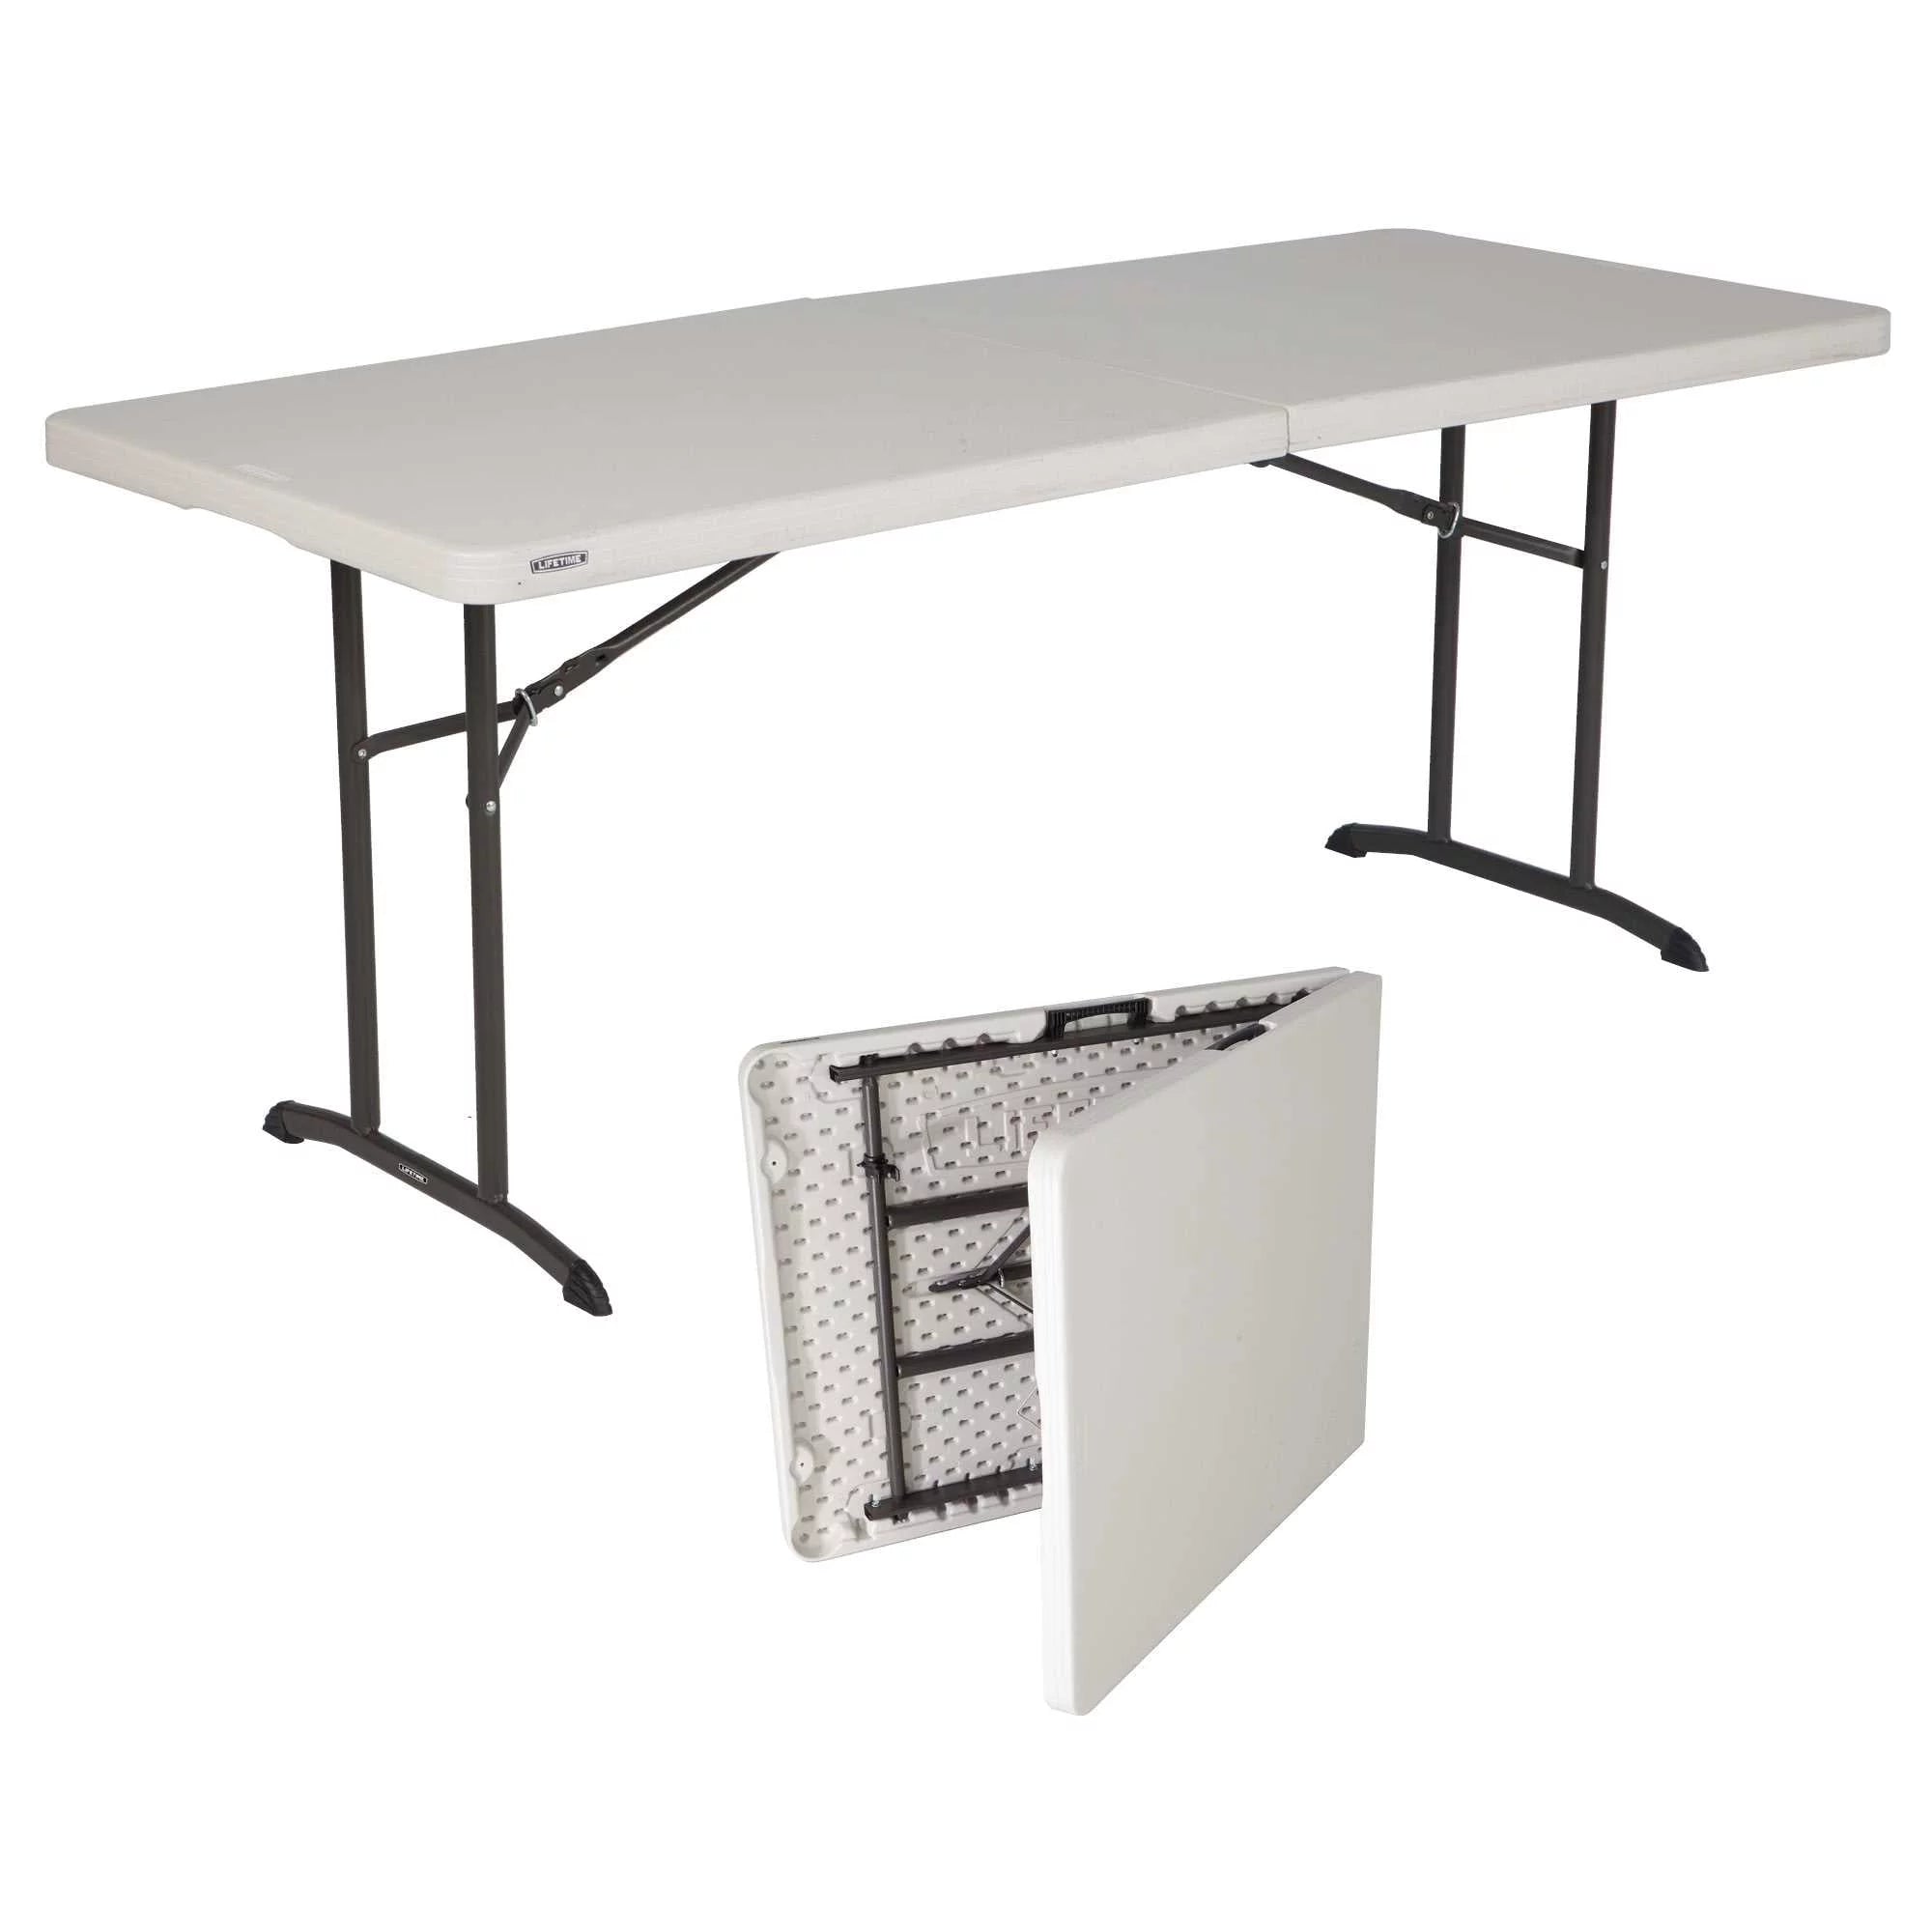 Save On 5 Or 6 Foot Rectangle Fold-in-Half Tables